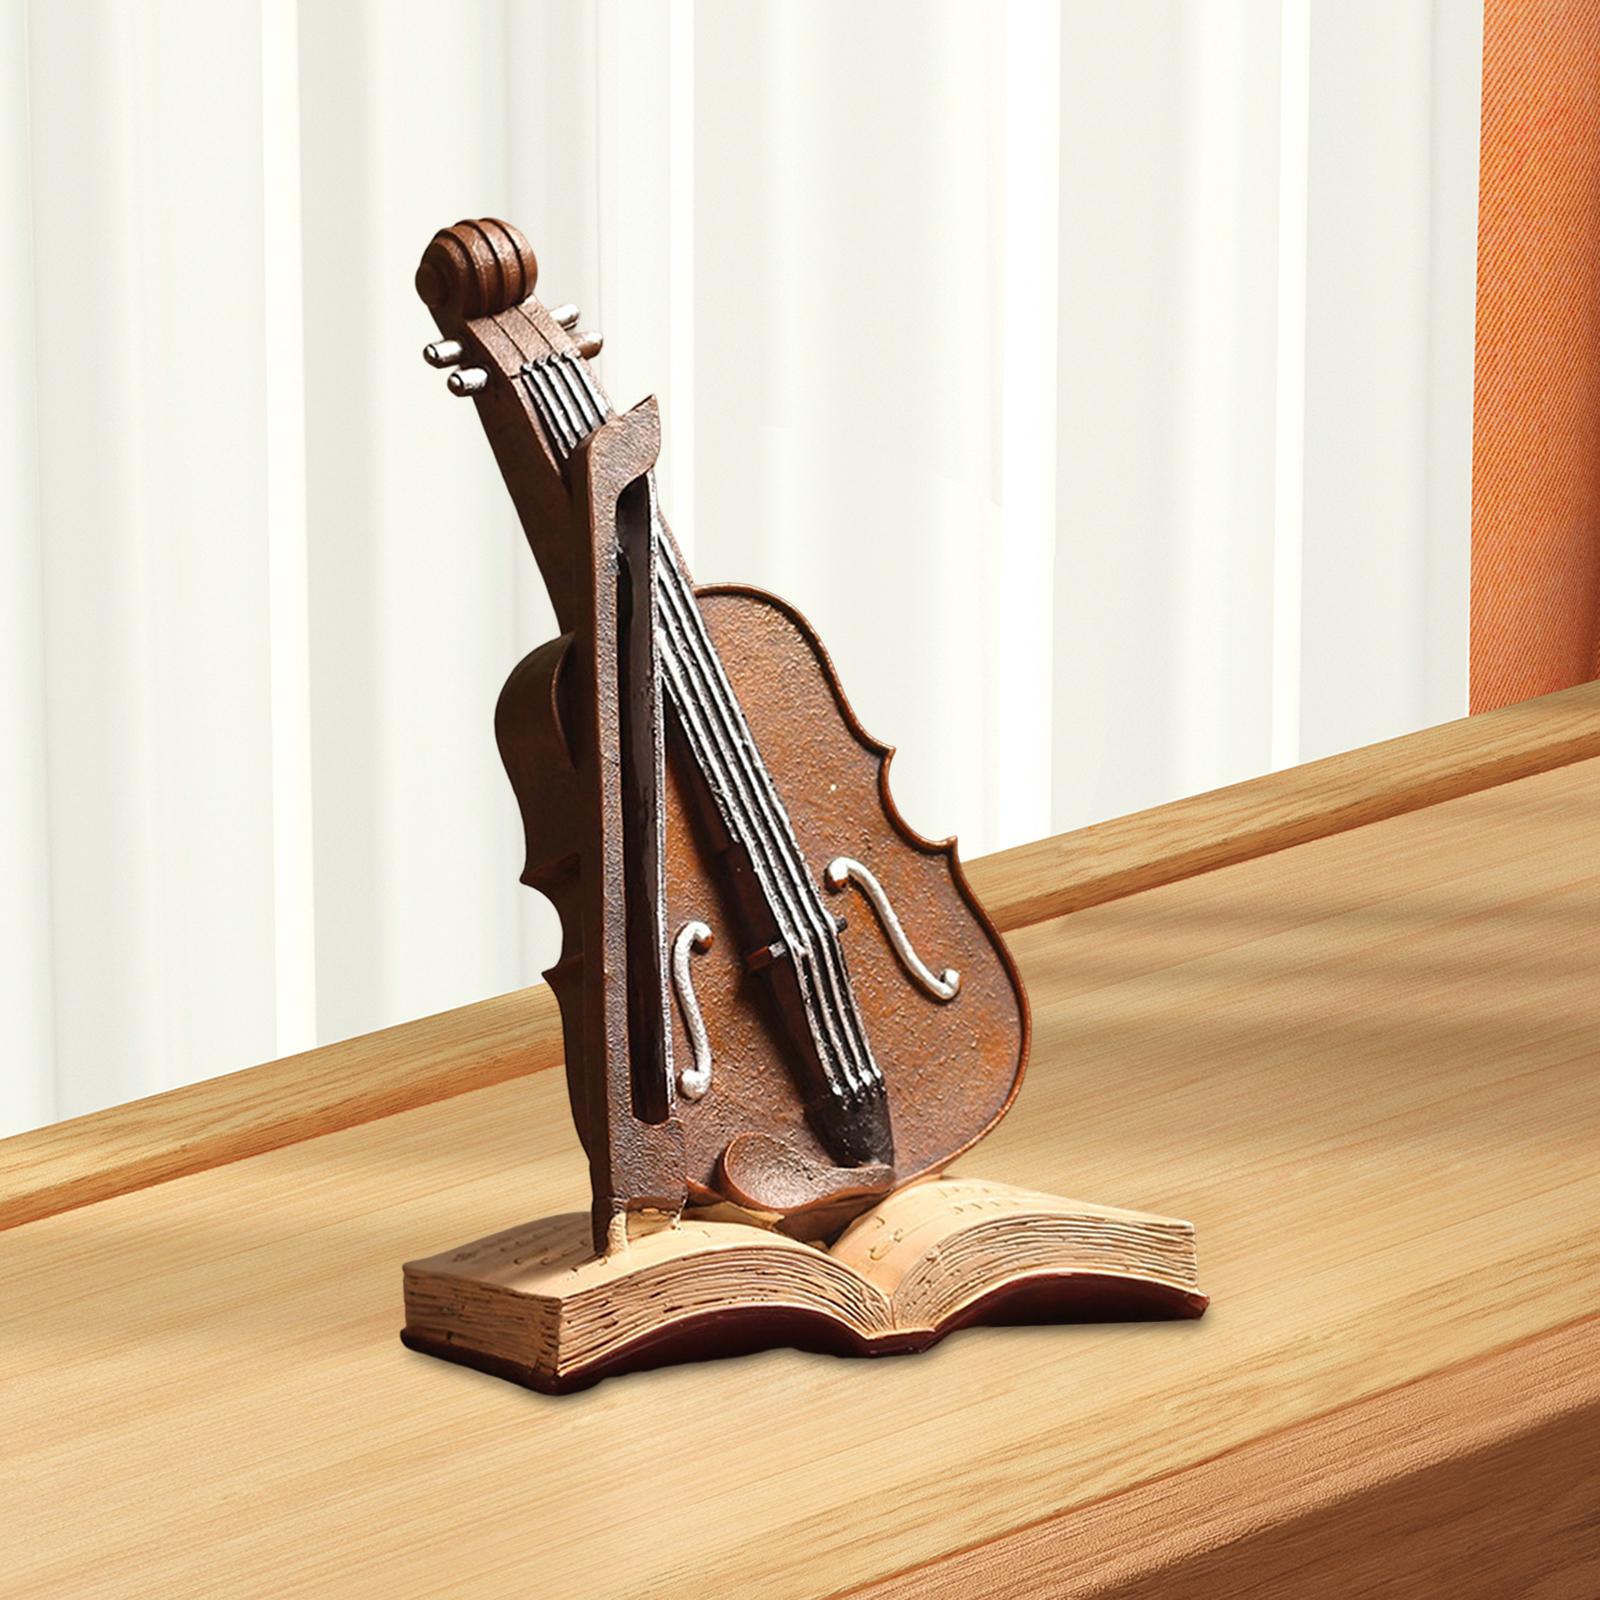 Resin Violin Statue Collection Gift Crafts Art for Table Office Decoration Brown